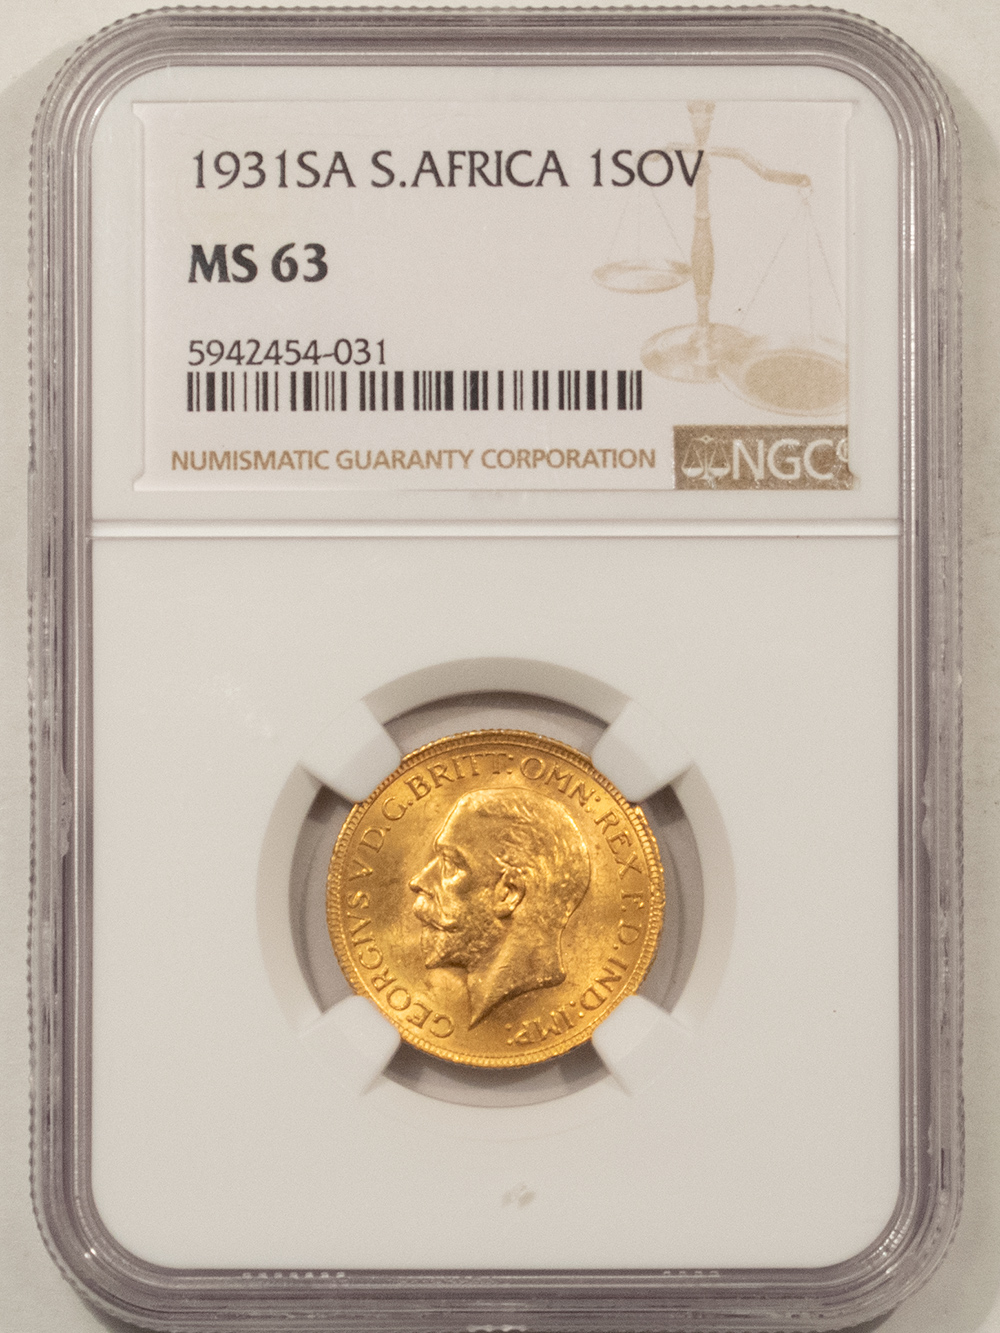 1931-SA, SOUTH AFRICA GOLD SOVEREIGN, NGC MS-63, .2354 AGW, FRESH LUSTROUS COIN!